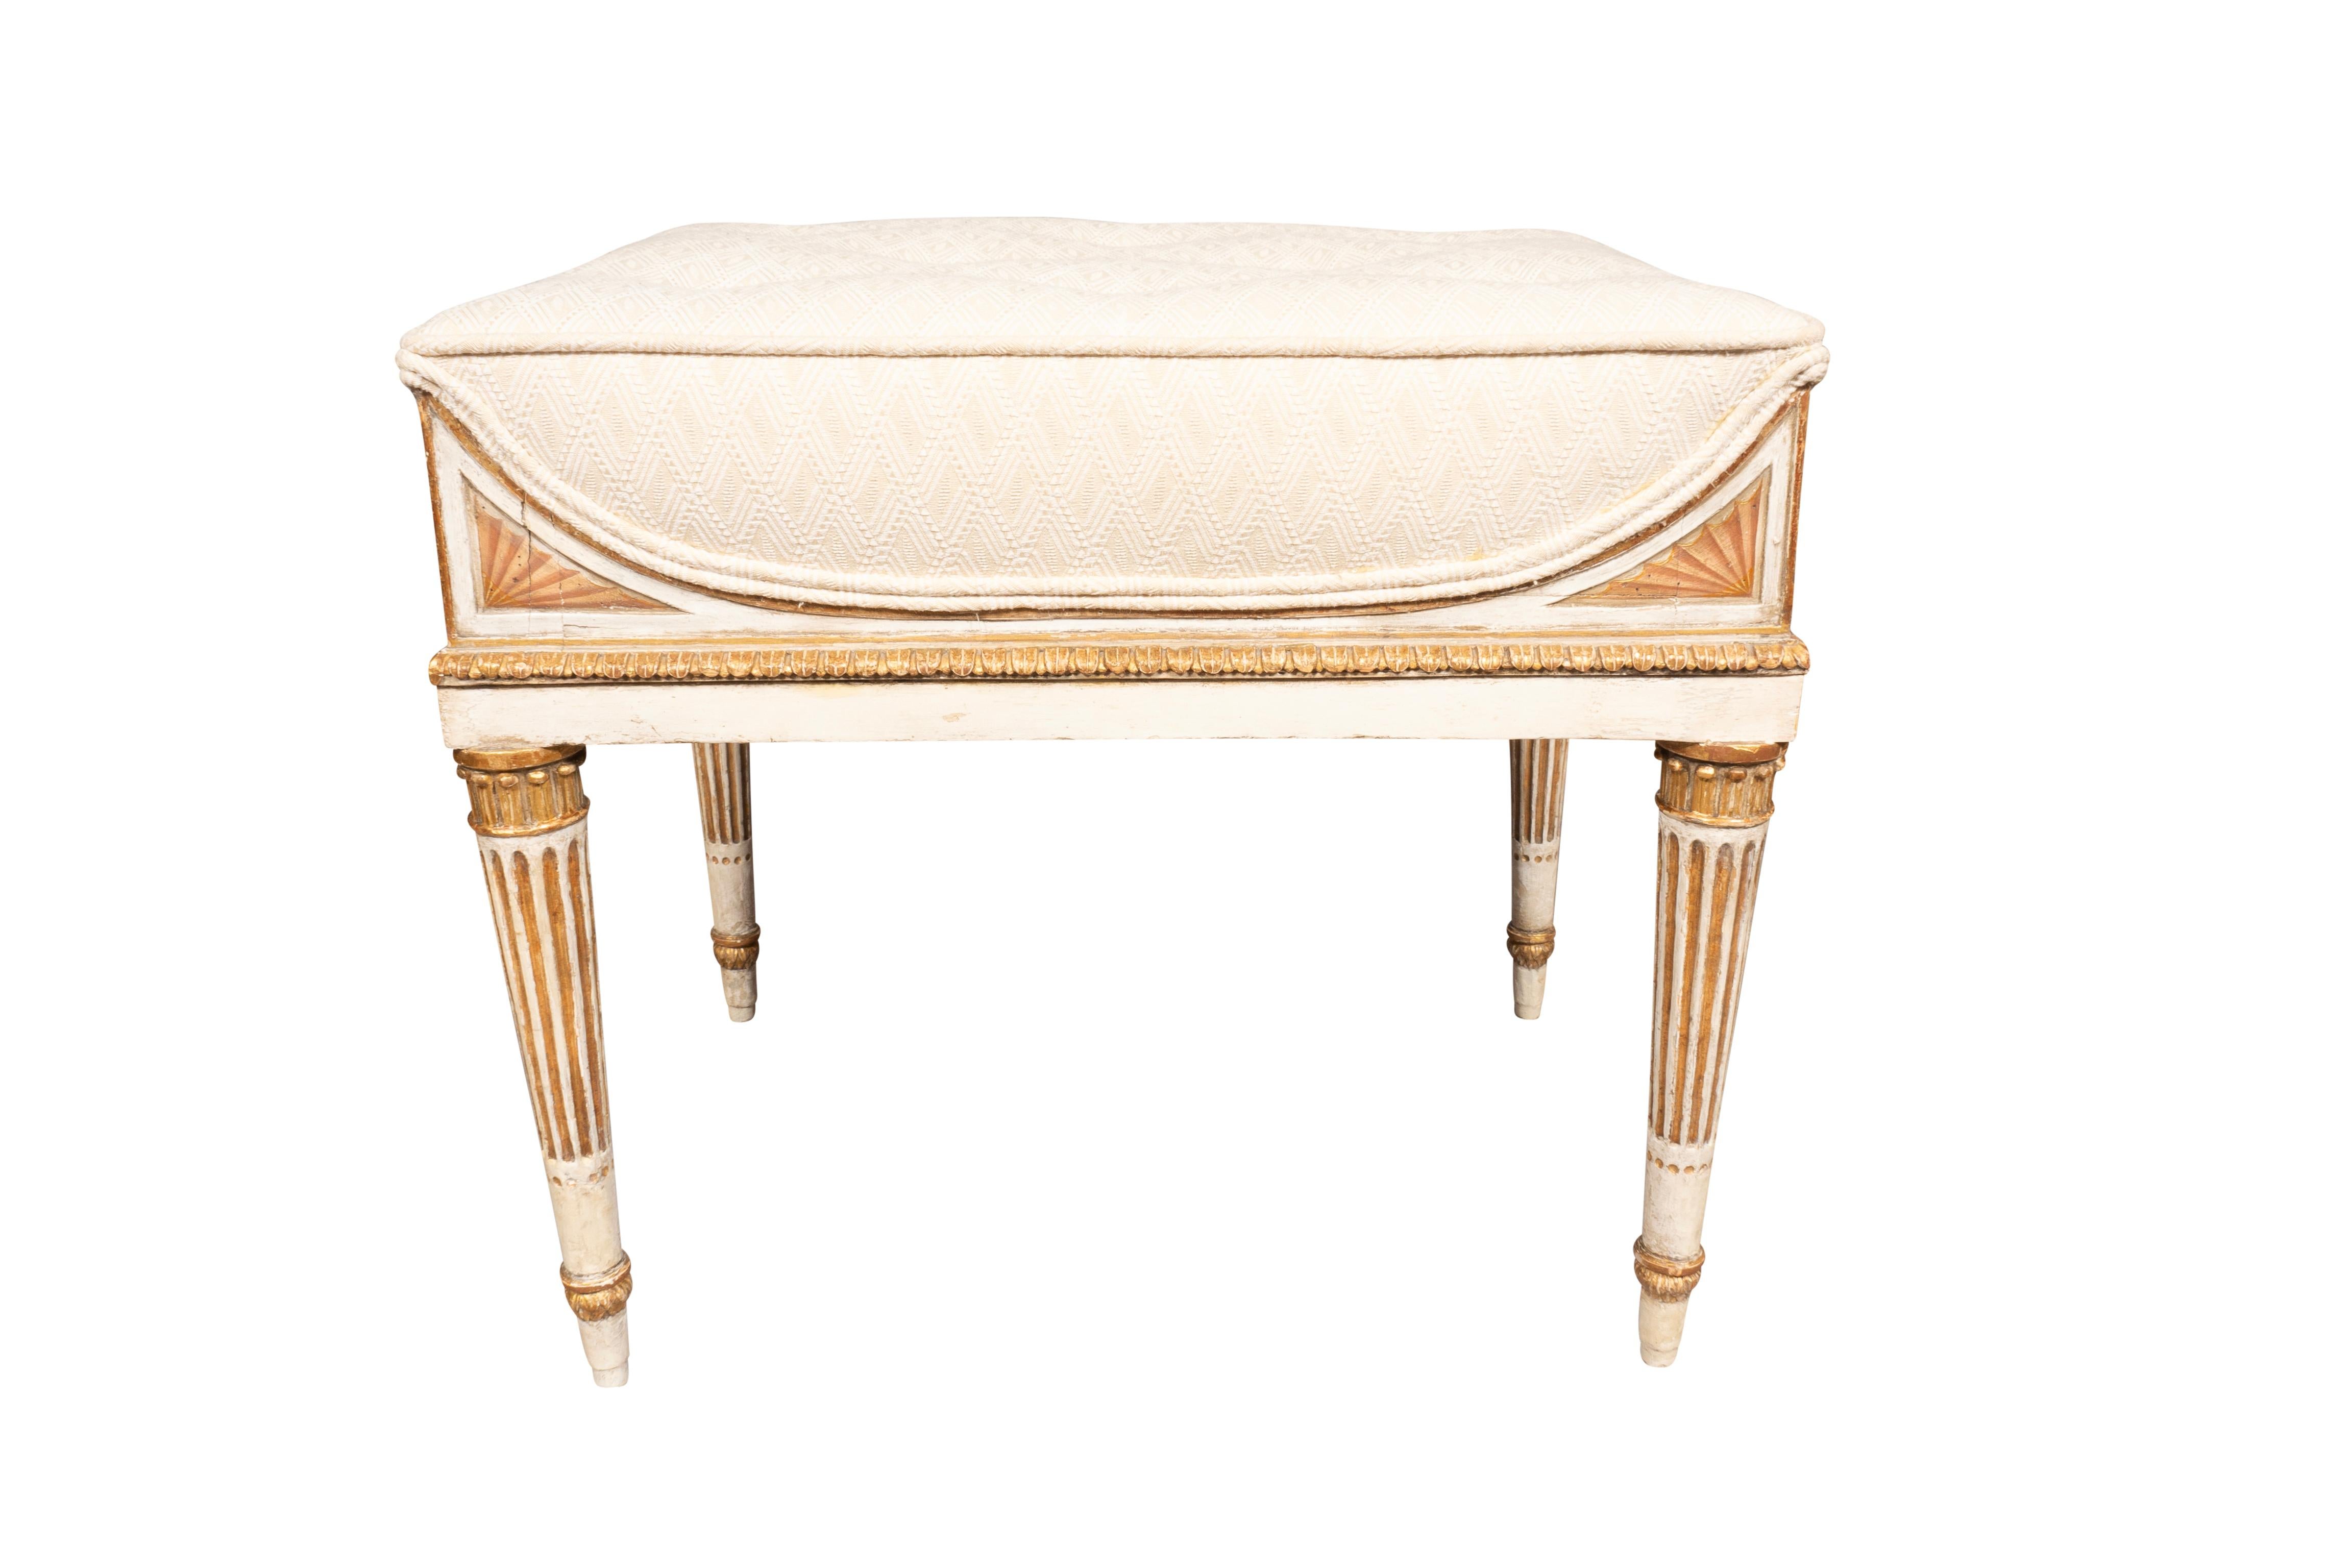 Late 18th Century  German Neoclassical Creme Painted And Giltwood Bench From Schloss Seelowitz For Sale